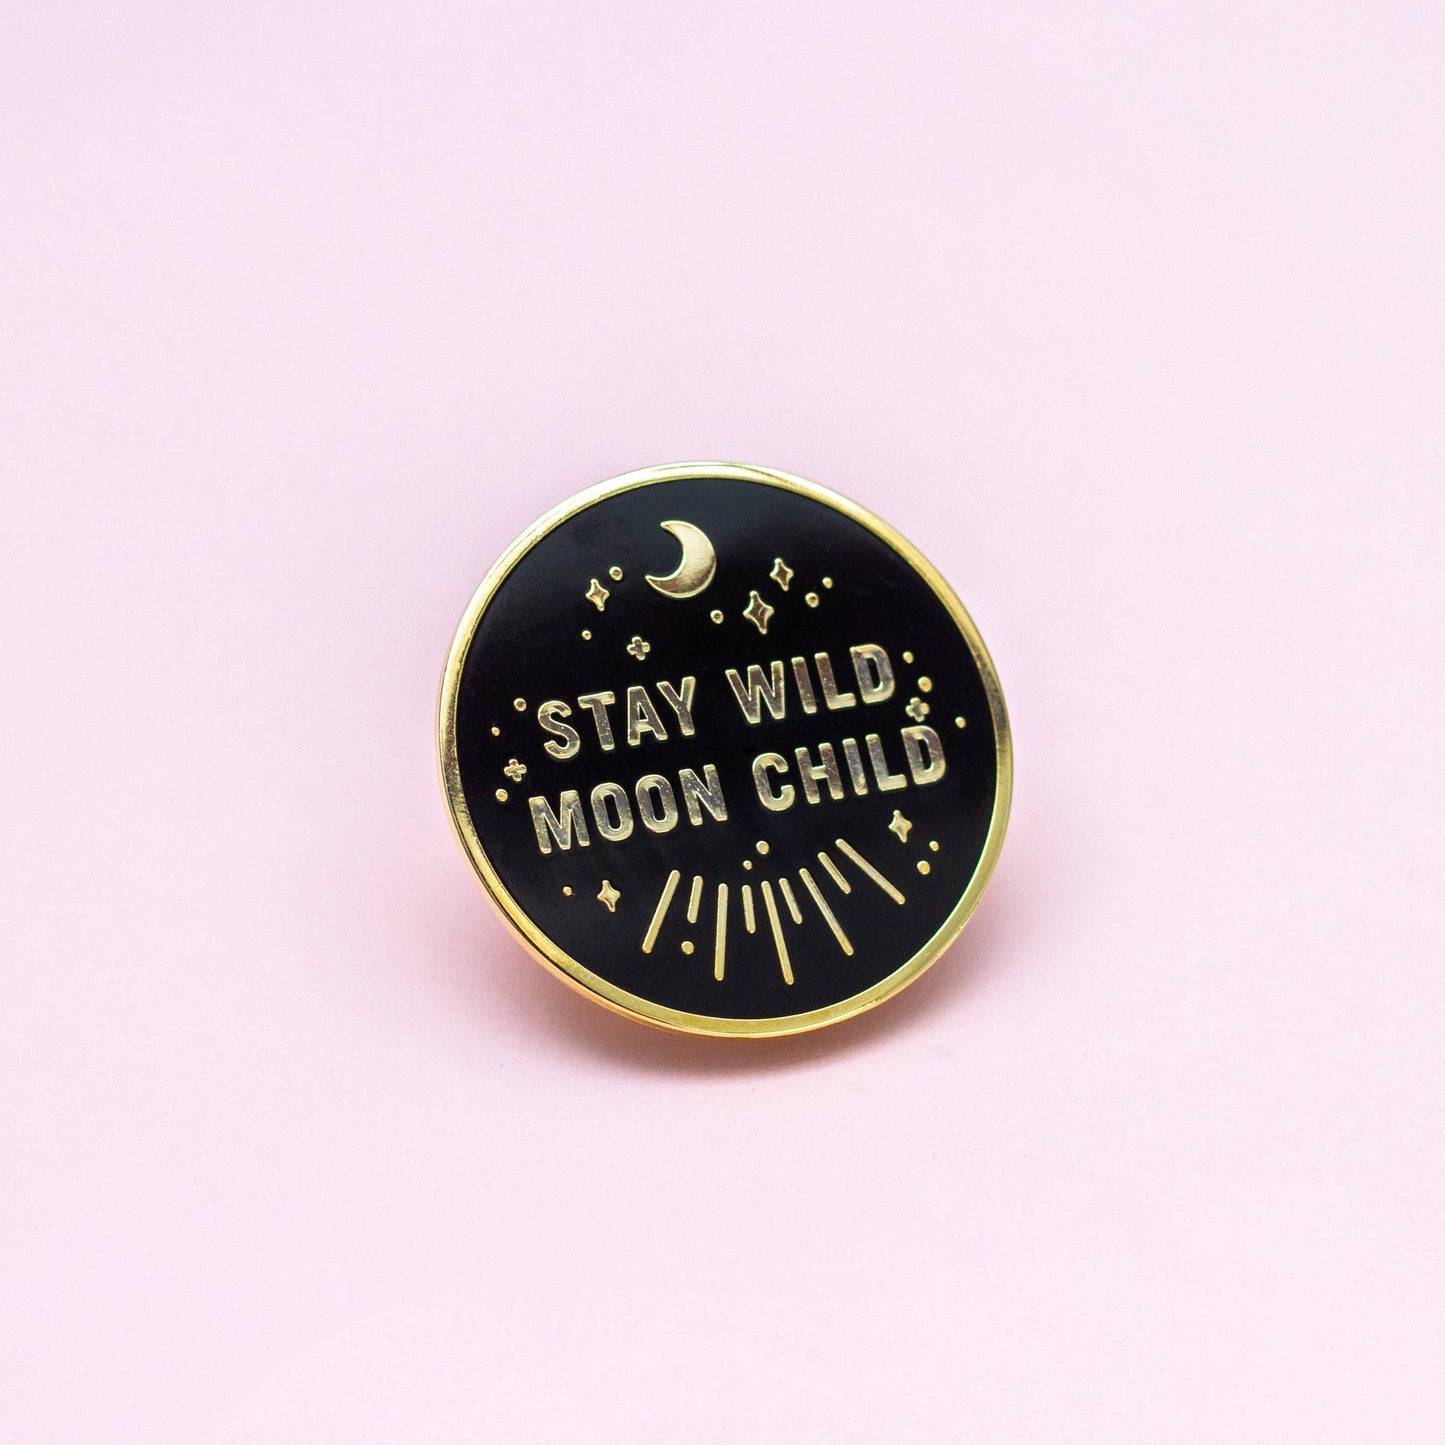 Stay Wild Moon Child Enamel Pin - Storm and Sky Shoppe